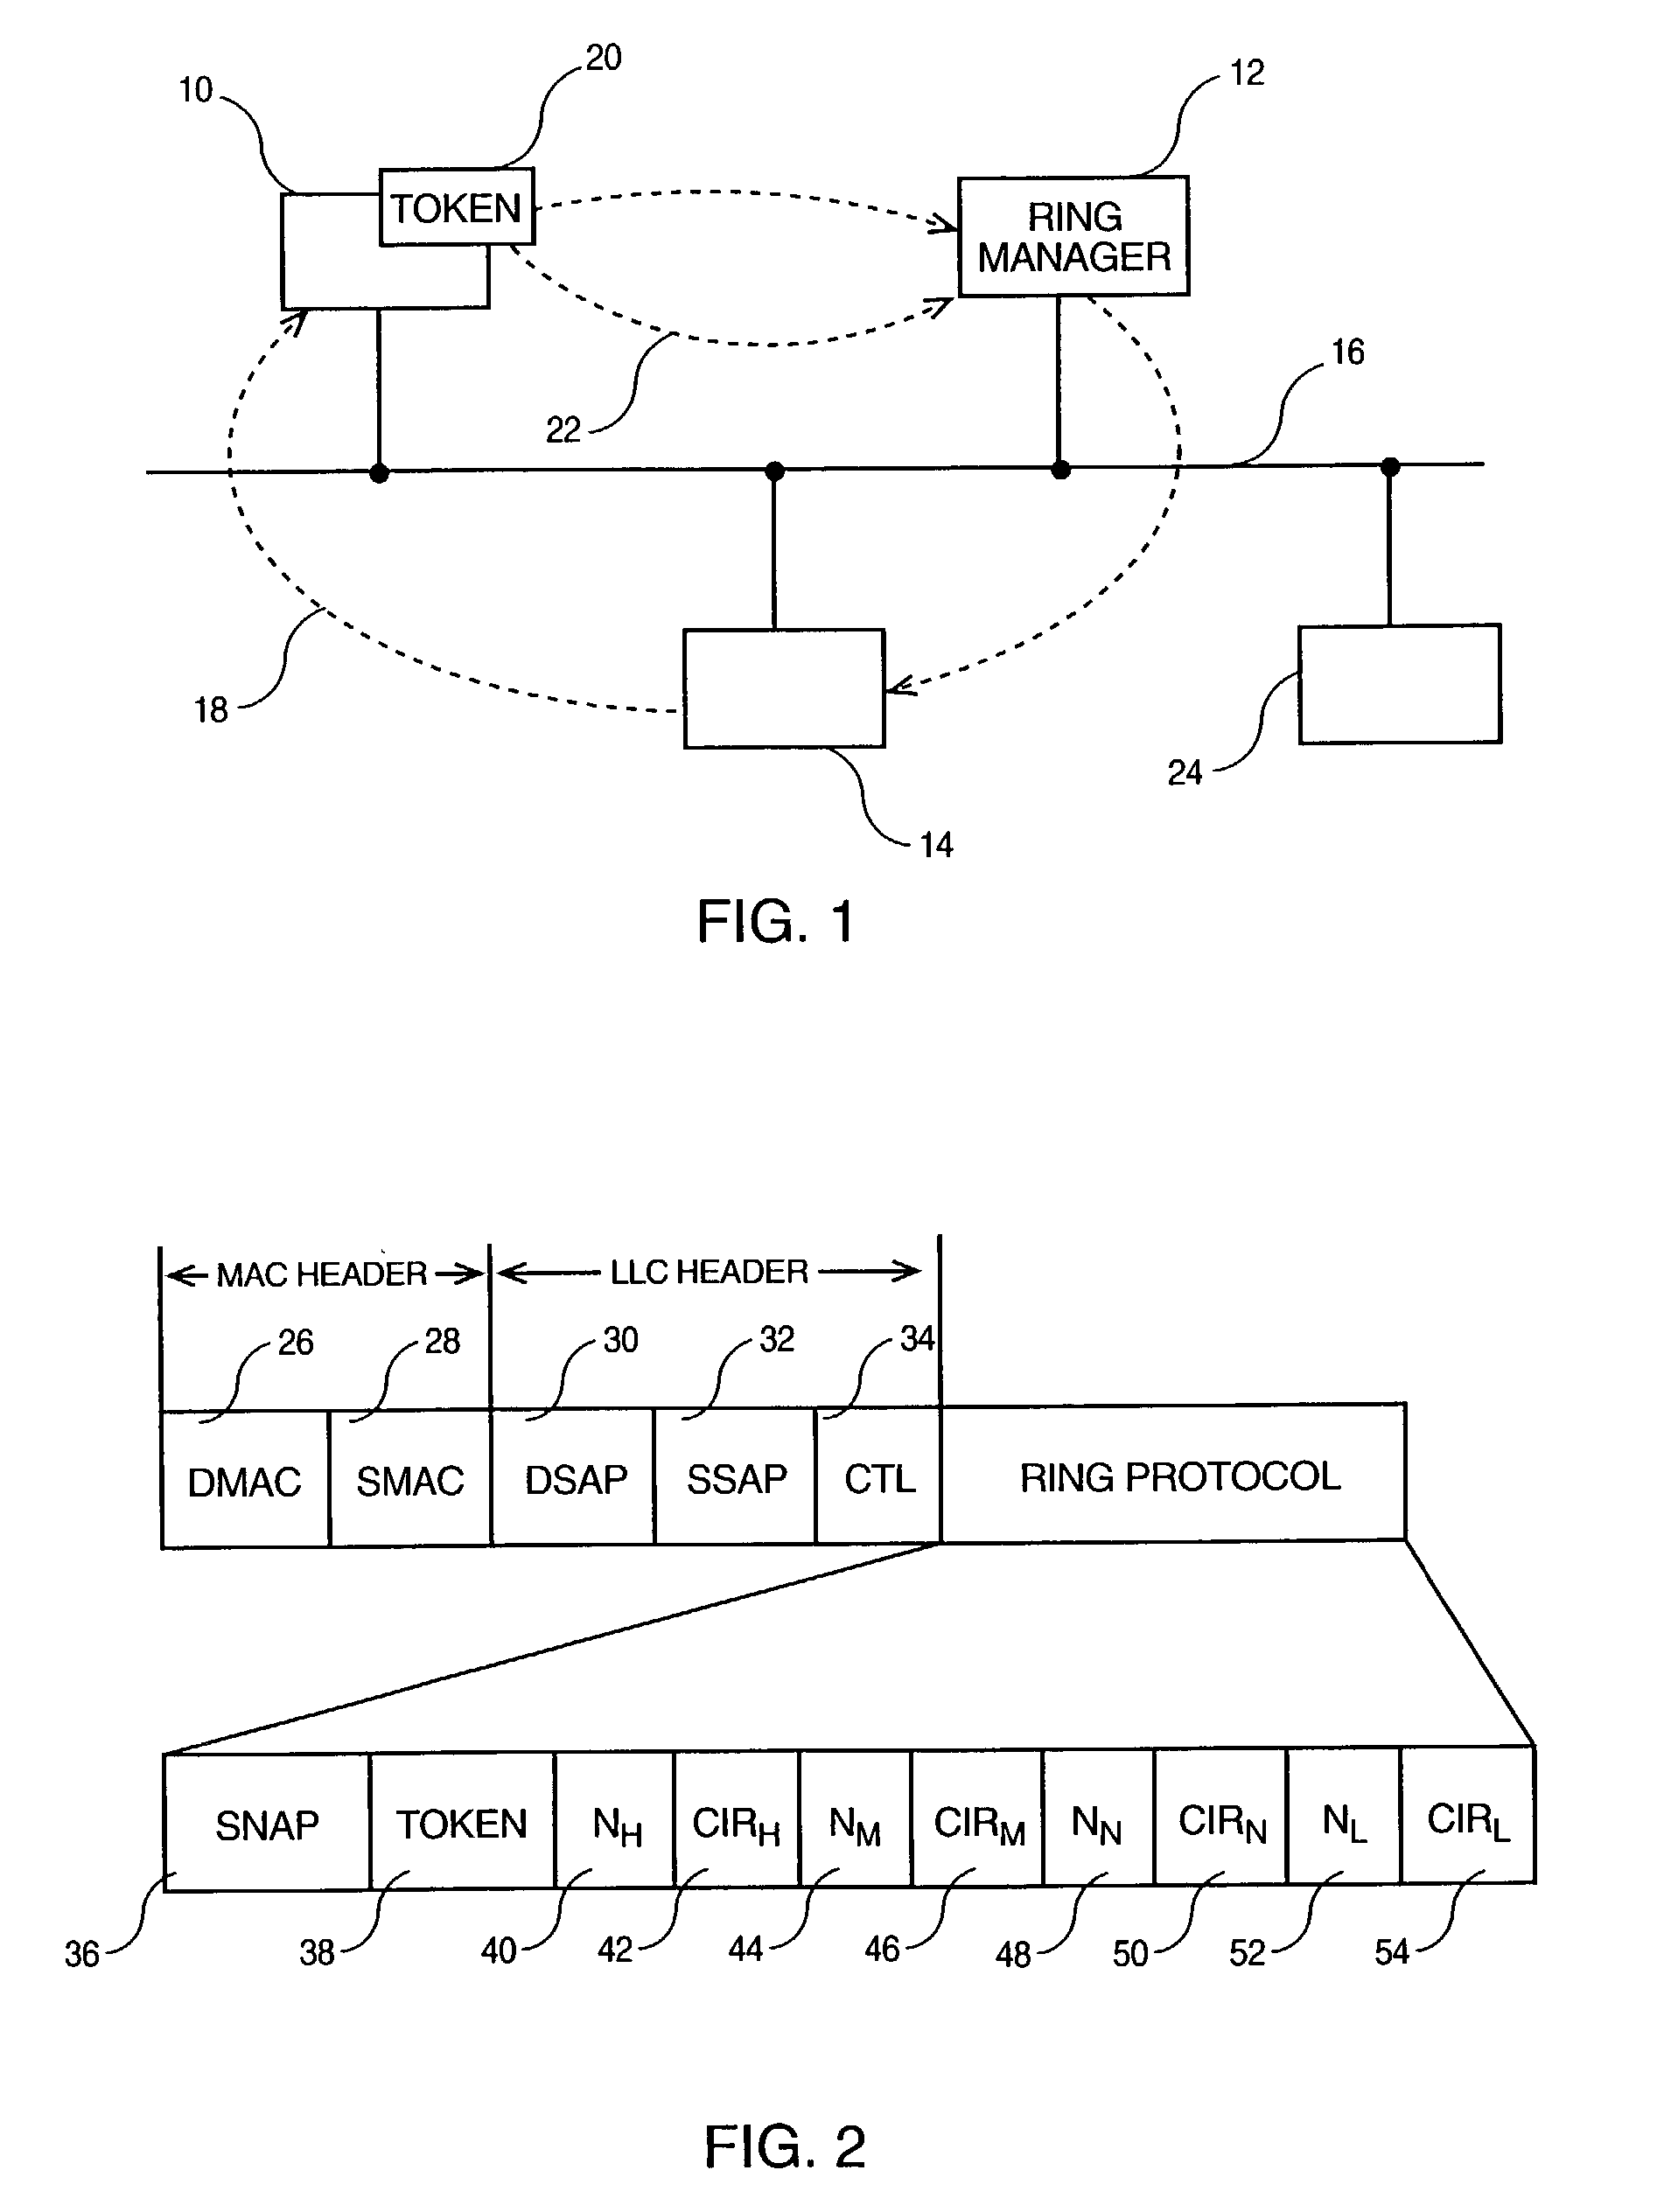 Method of allocating bandwidth on request to the stations of a local area network